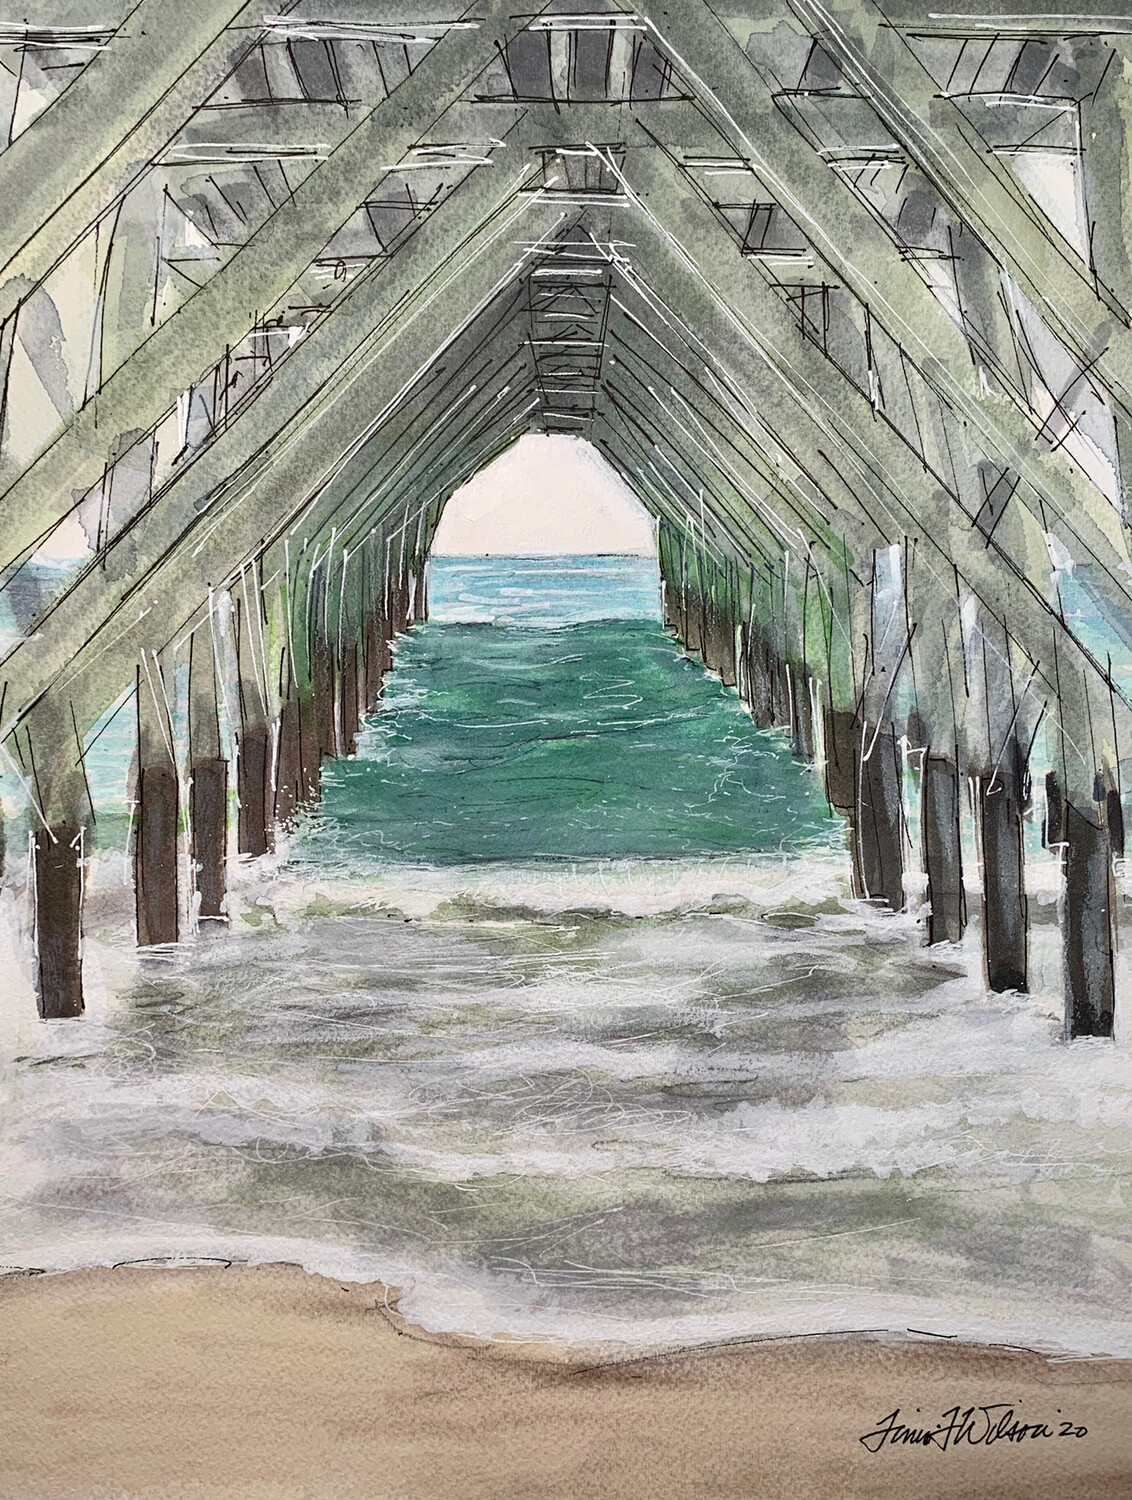 Wrightsville, NC - Oceanic Pier - 11"x14" - Matted Print - #lew